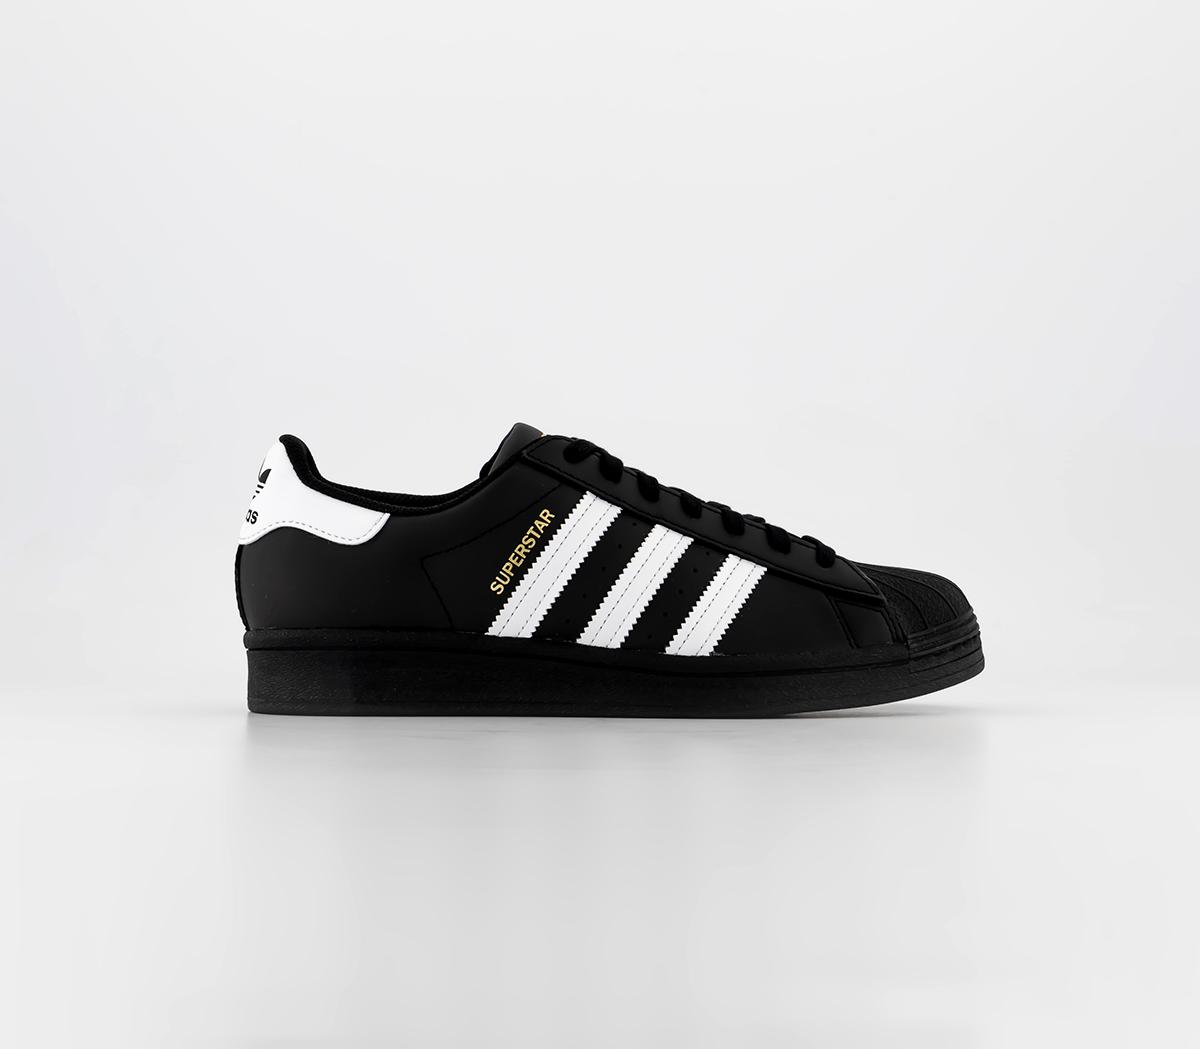 Adidas Superstar Trainers Black White Leather In Black And White, 6